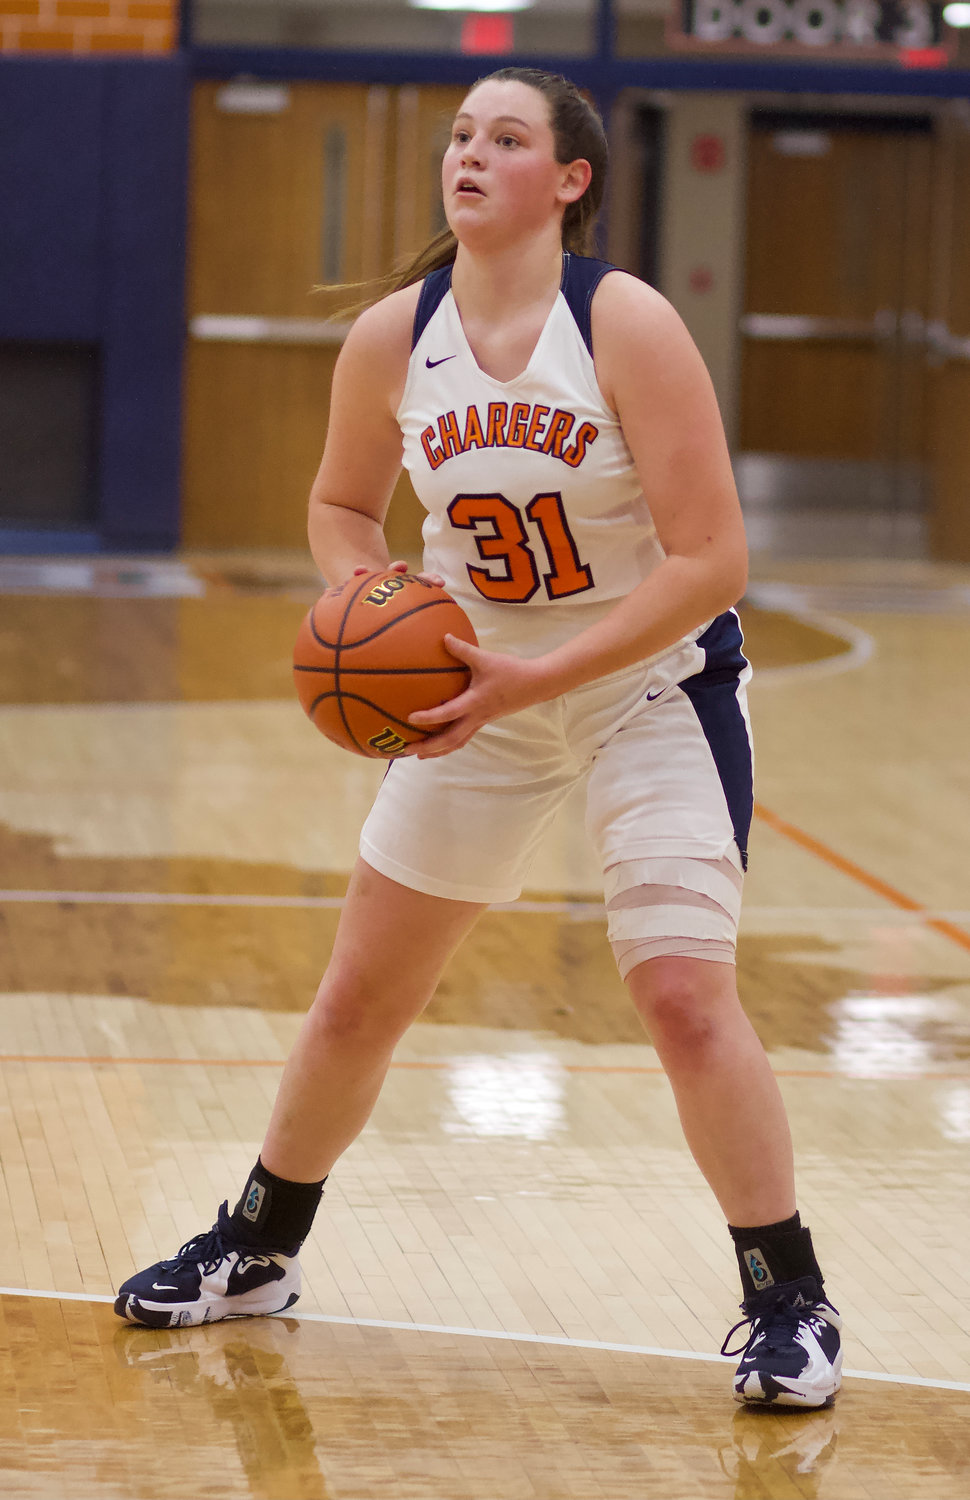 Katie Rice led the Chargers with 24 points in the game.